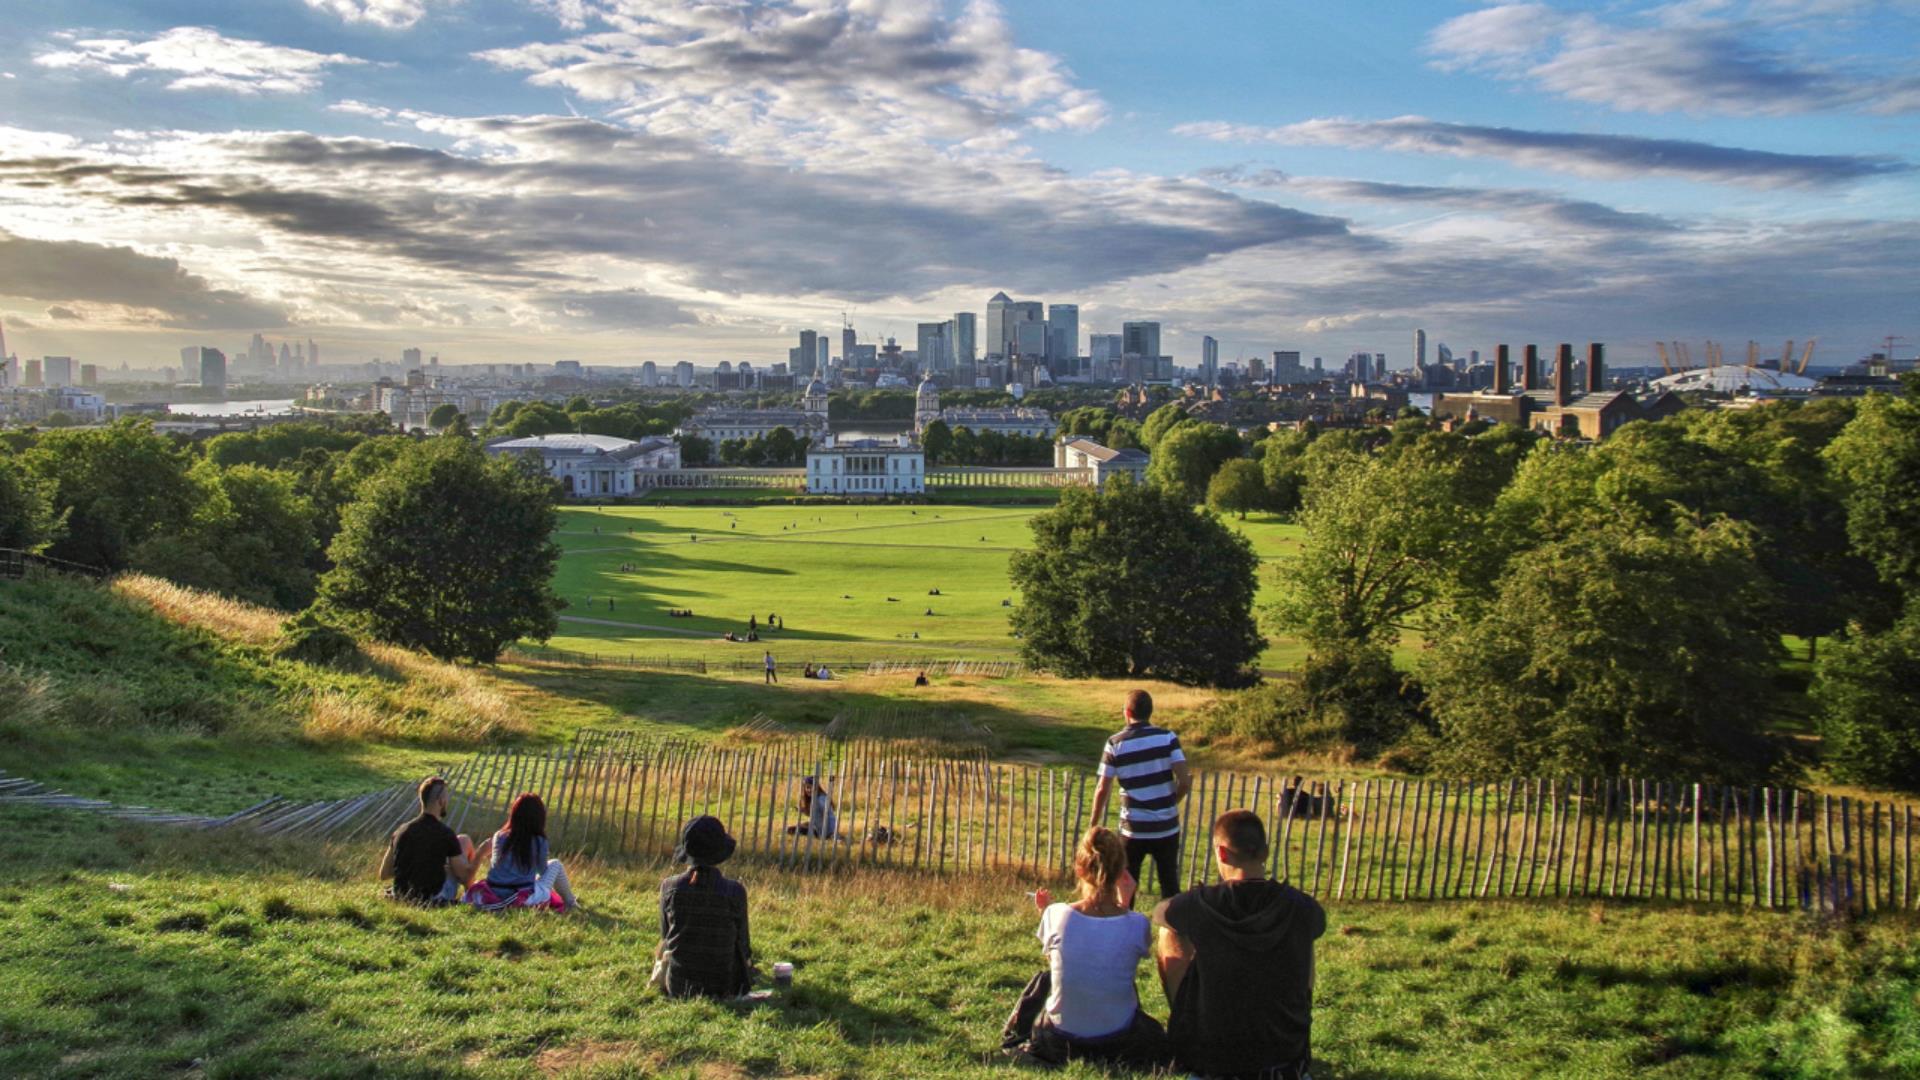 The view of Greenwich from the top of the hill in Greenwich Park over The Queen's House, National Maritime Museum and Canary Wharf.